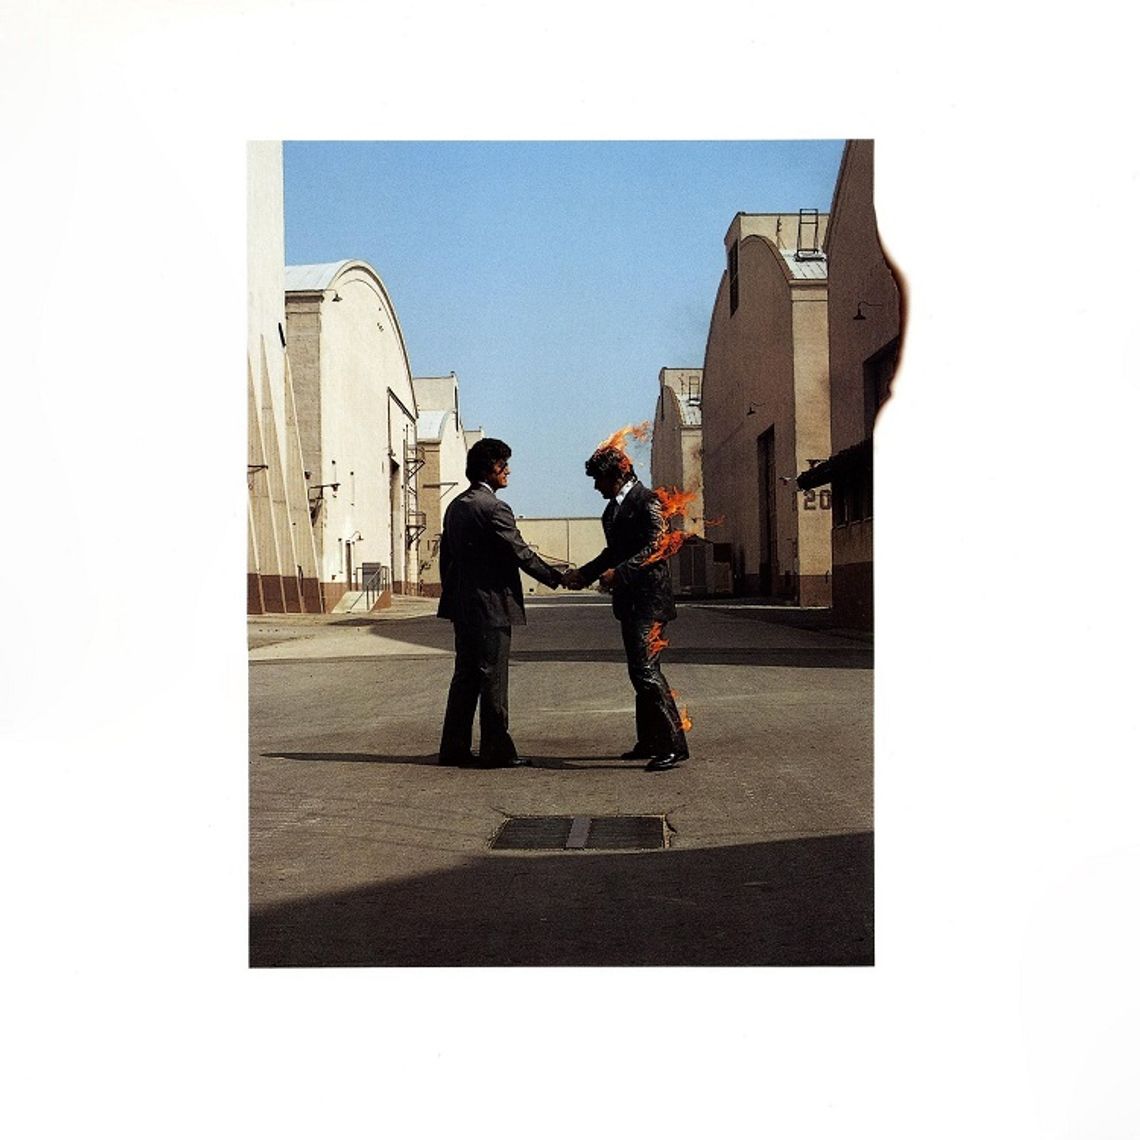 PINK FLOYD "Wish you were here"